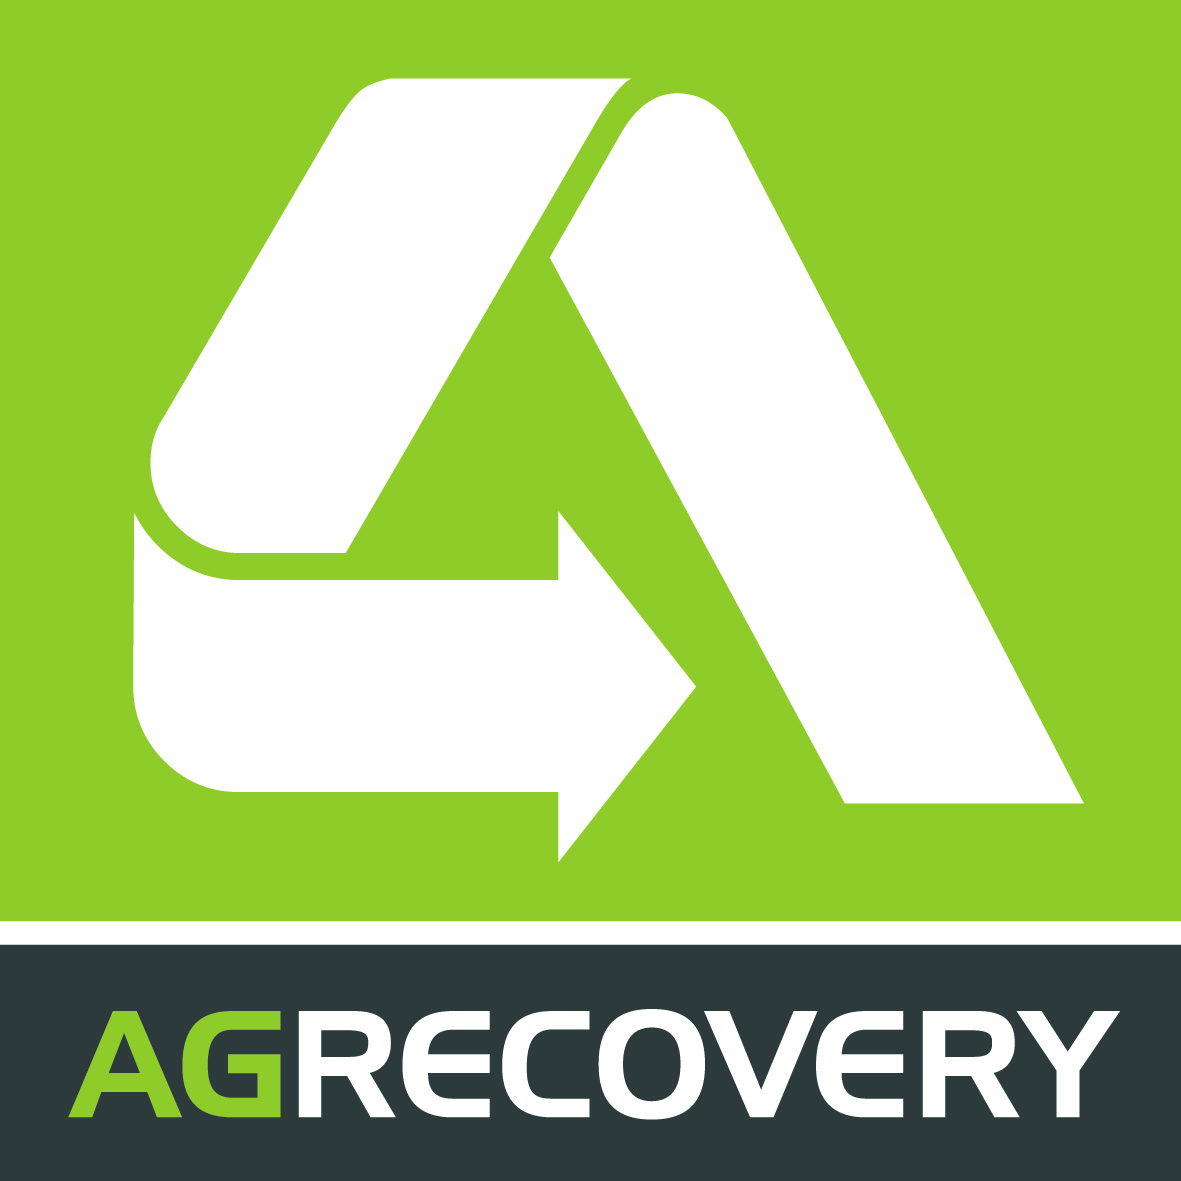 Agrecovery